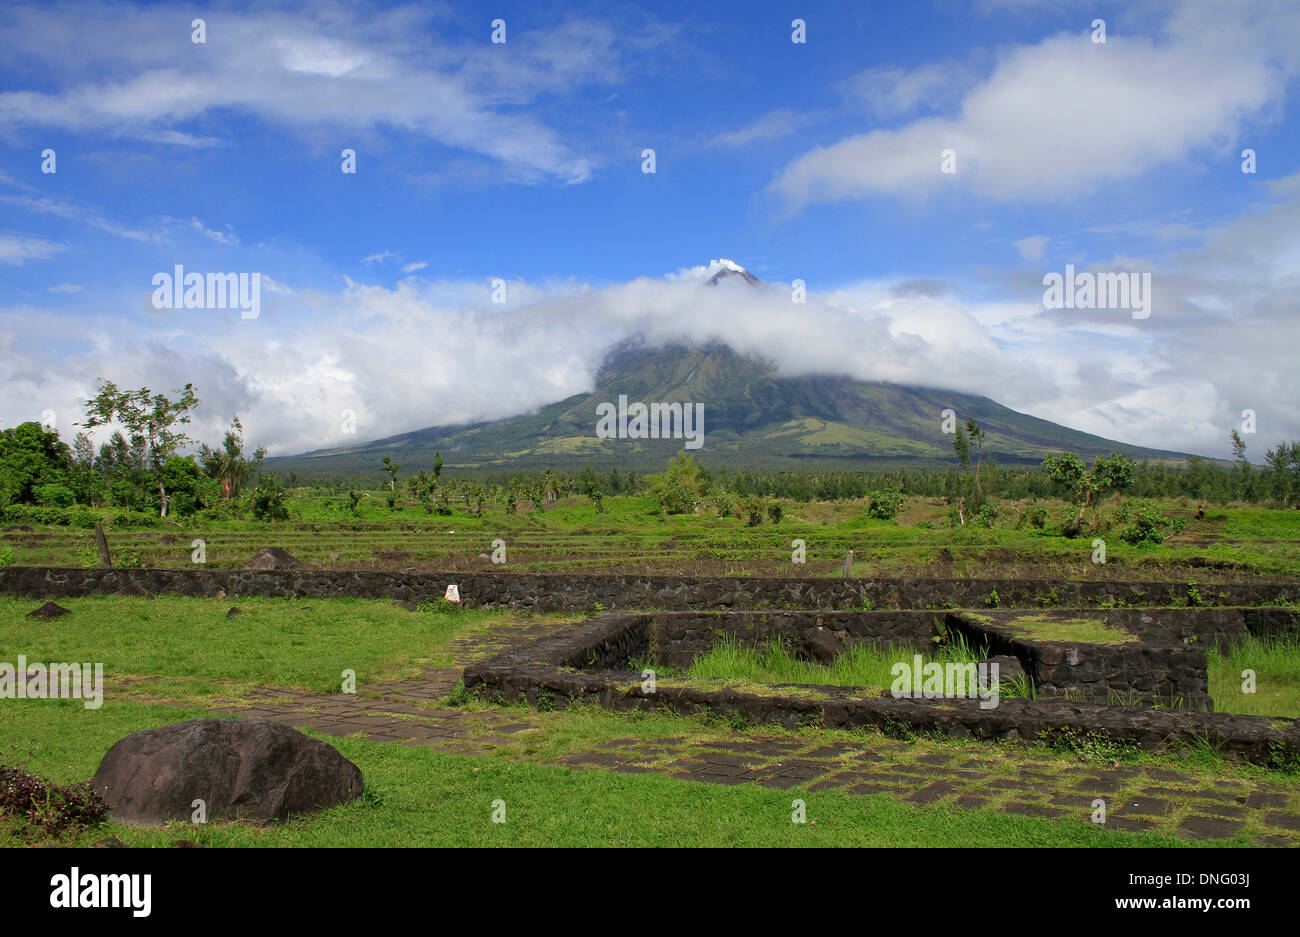 Mayon Volcano in Albay province, Philippines Stock Photo